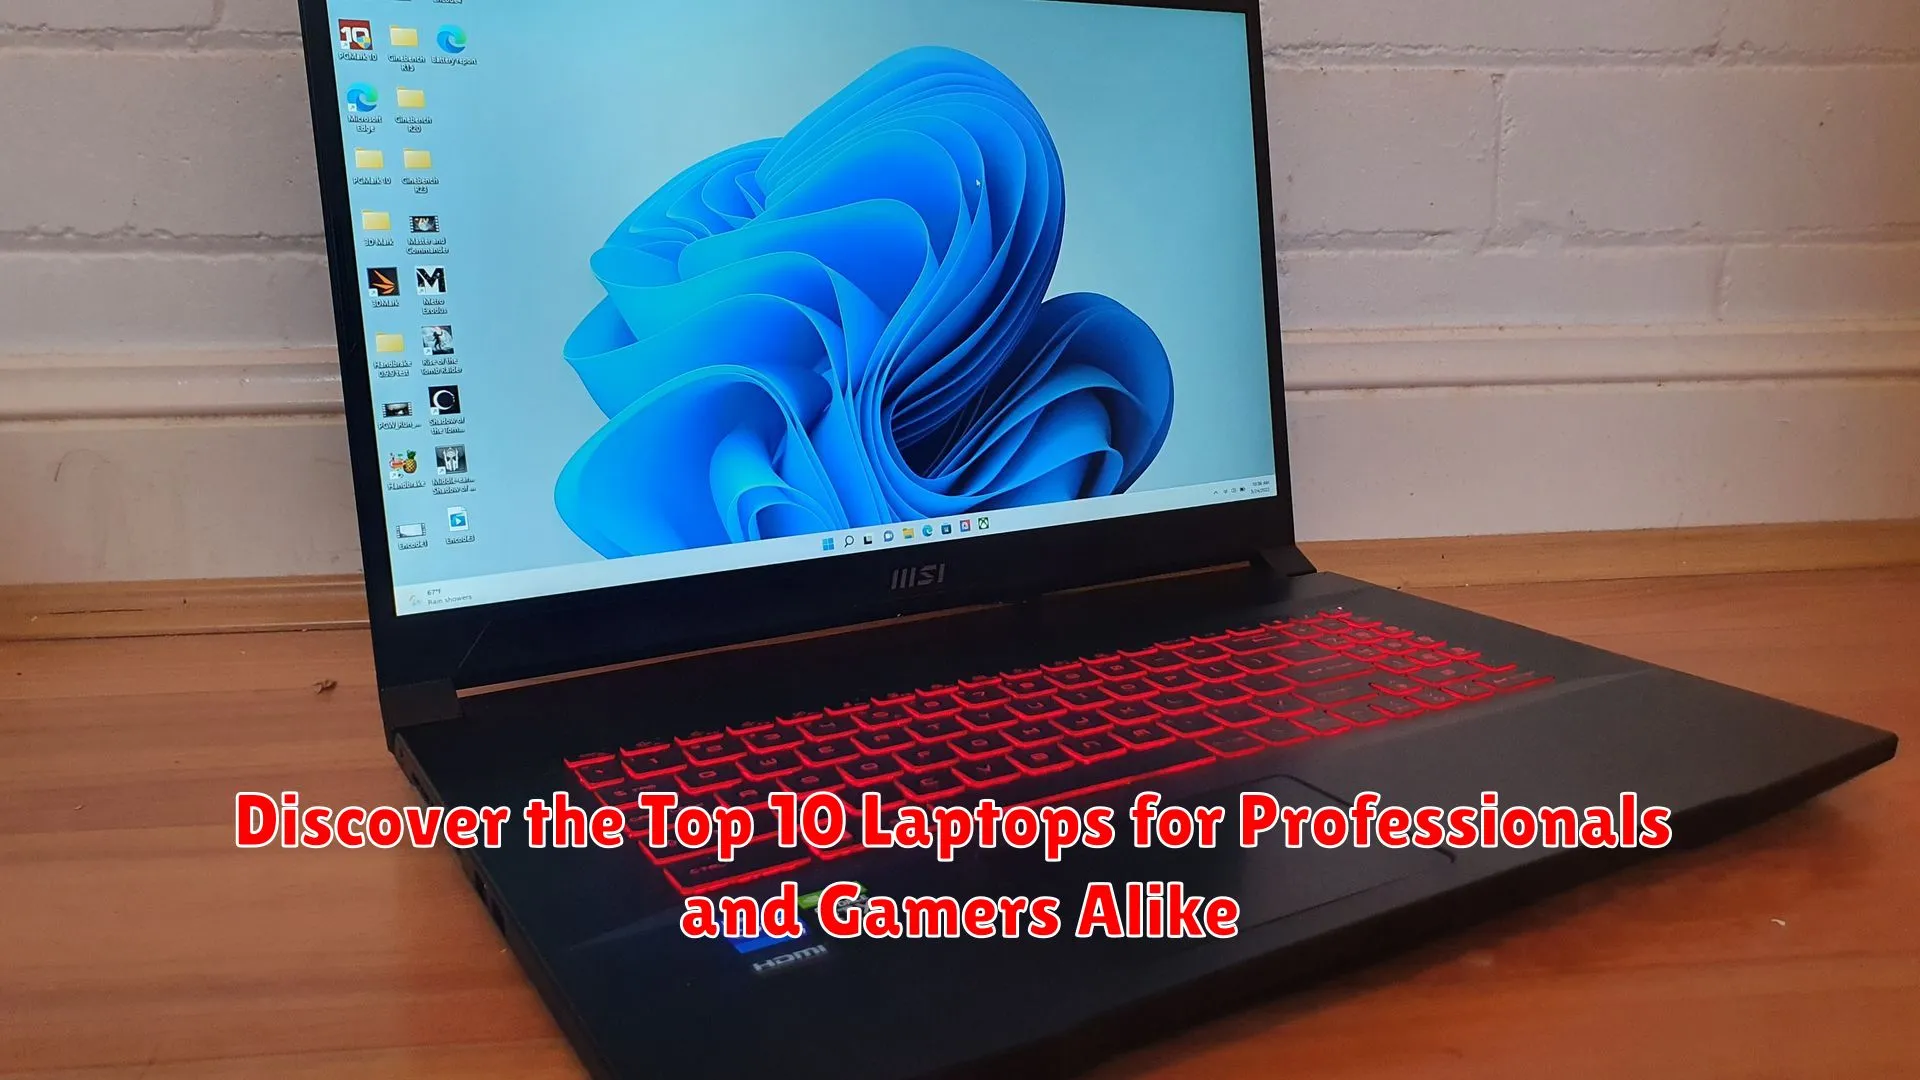 Discover the Top 10 Laptops for Professionals and Gamers Alike